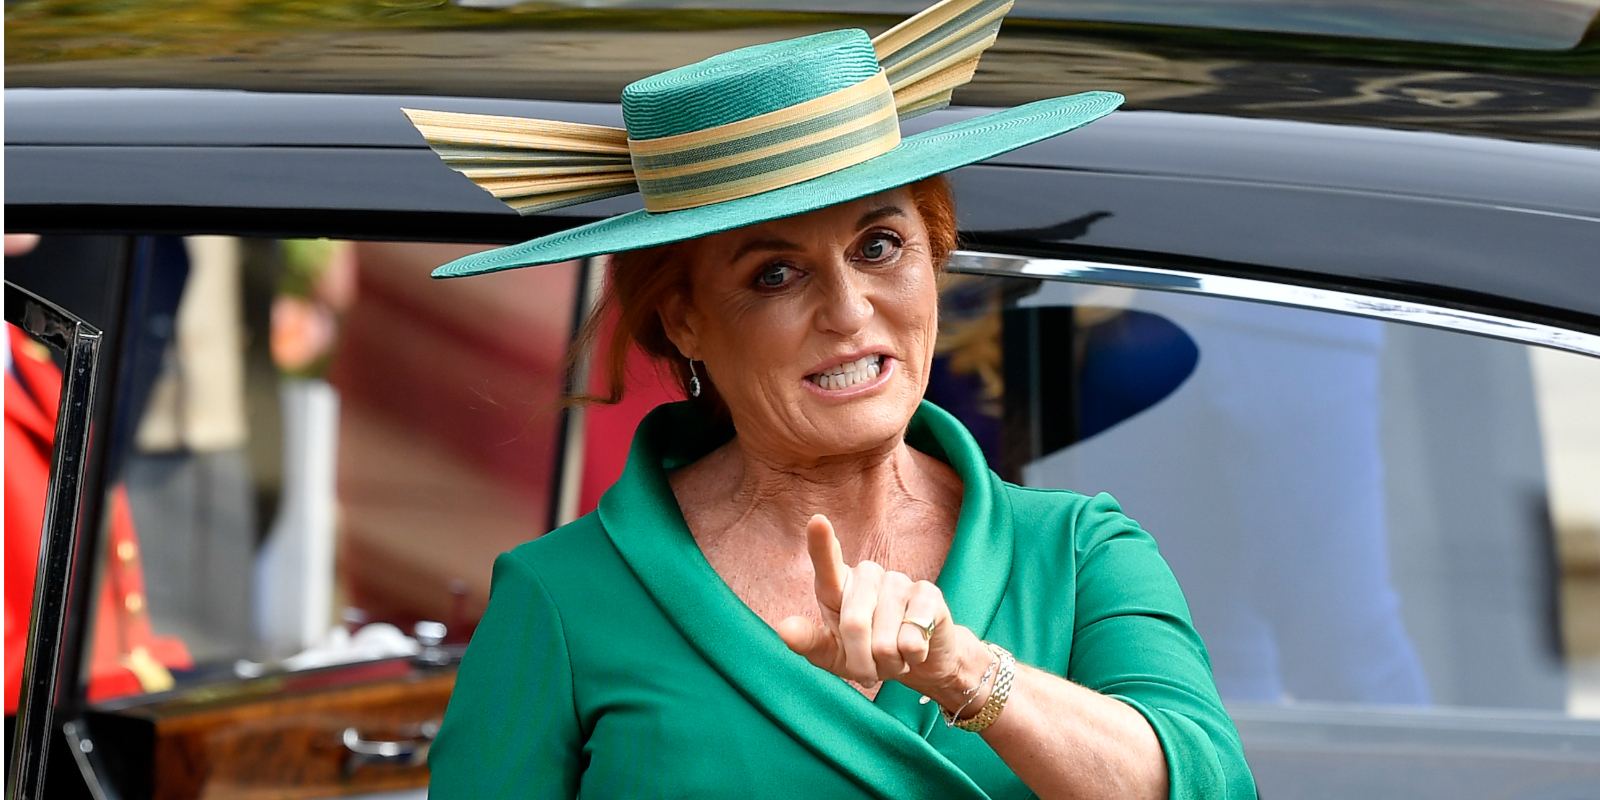 Sarah Ferguson has a message for Prince Harry and Meghan Markle, saying they can't sit on the fence with the royal family.